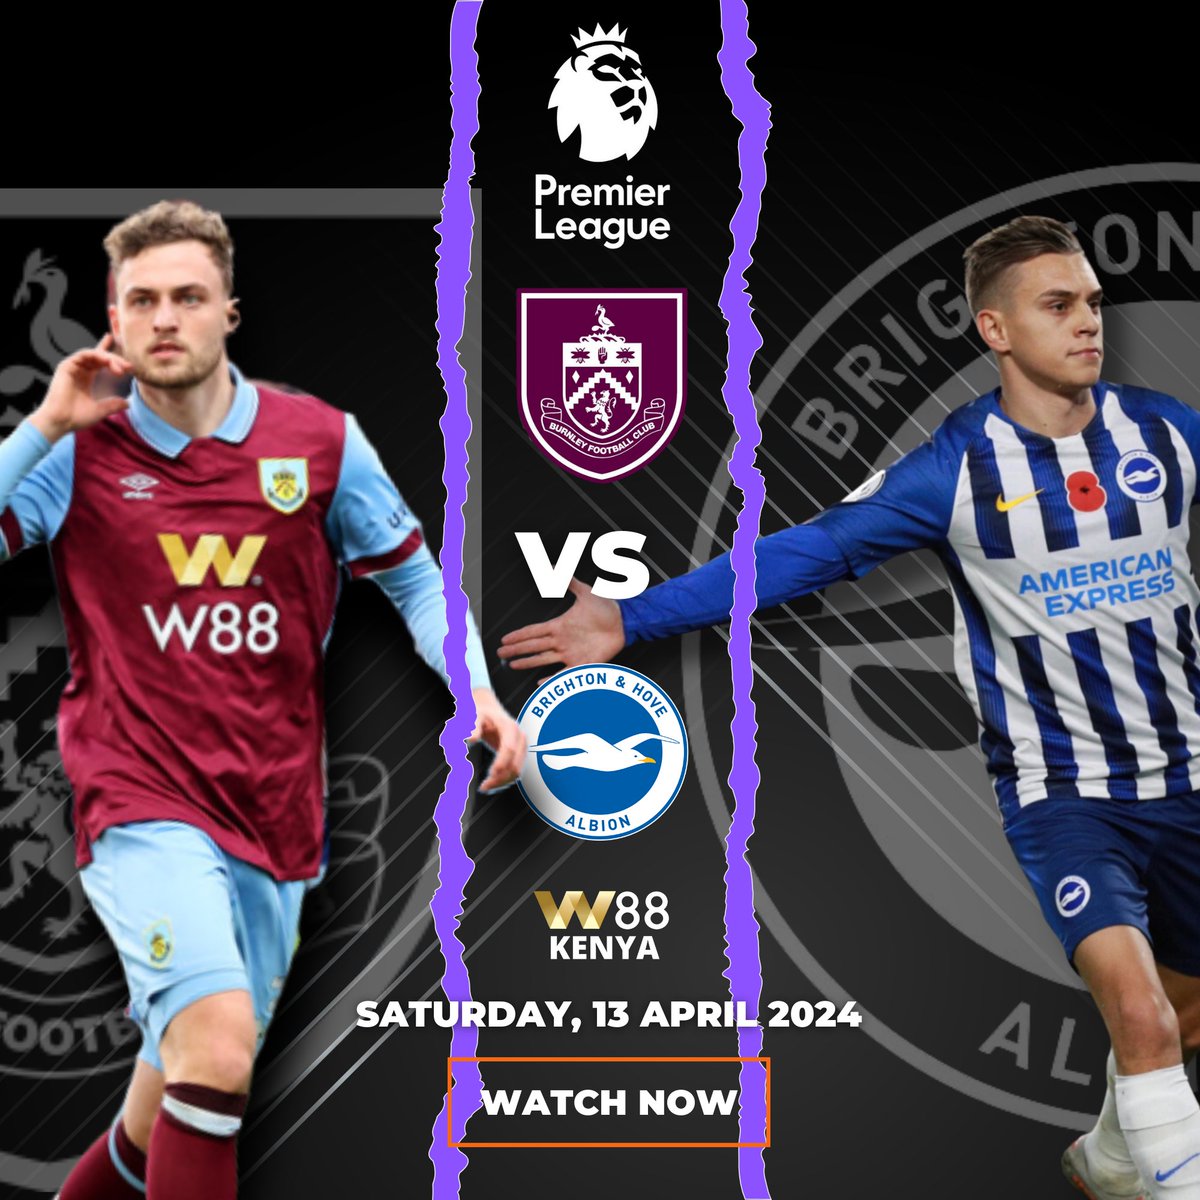 EPL battle is set to continue today where Burnley will be battling against Brighton 
Hapa unaona team gani itawin? 
#EPL
#BURBHA
#JoinW88